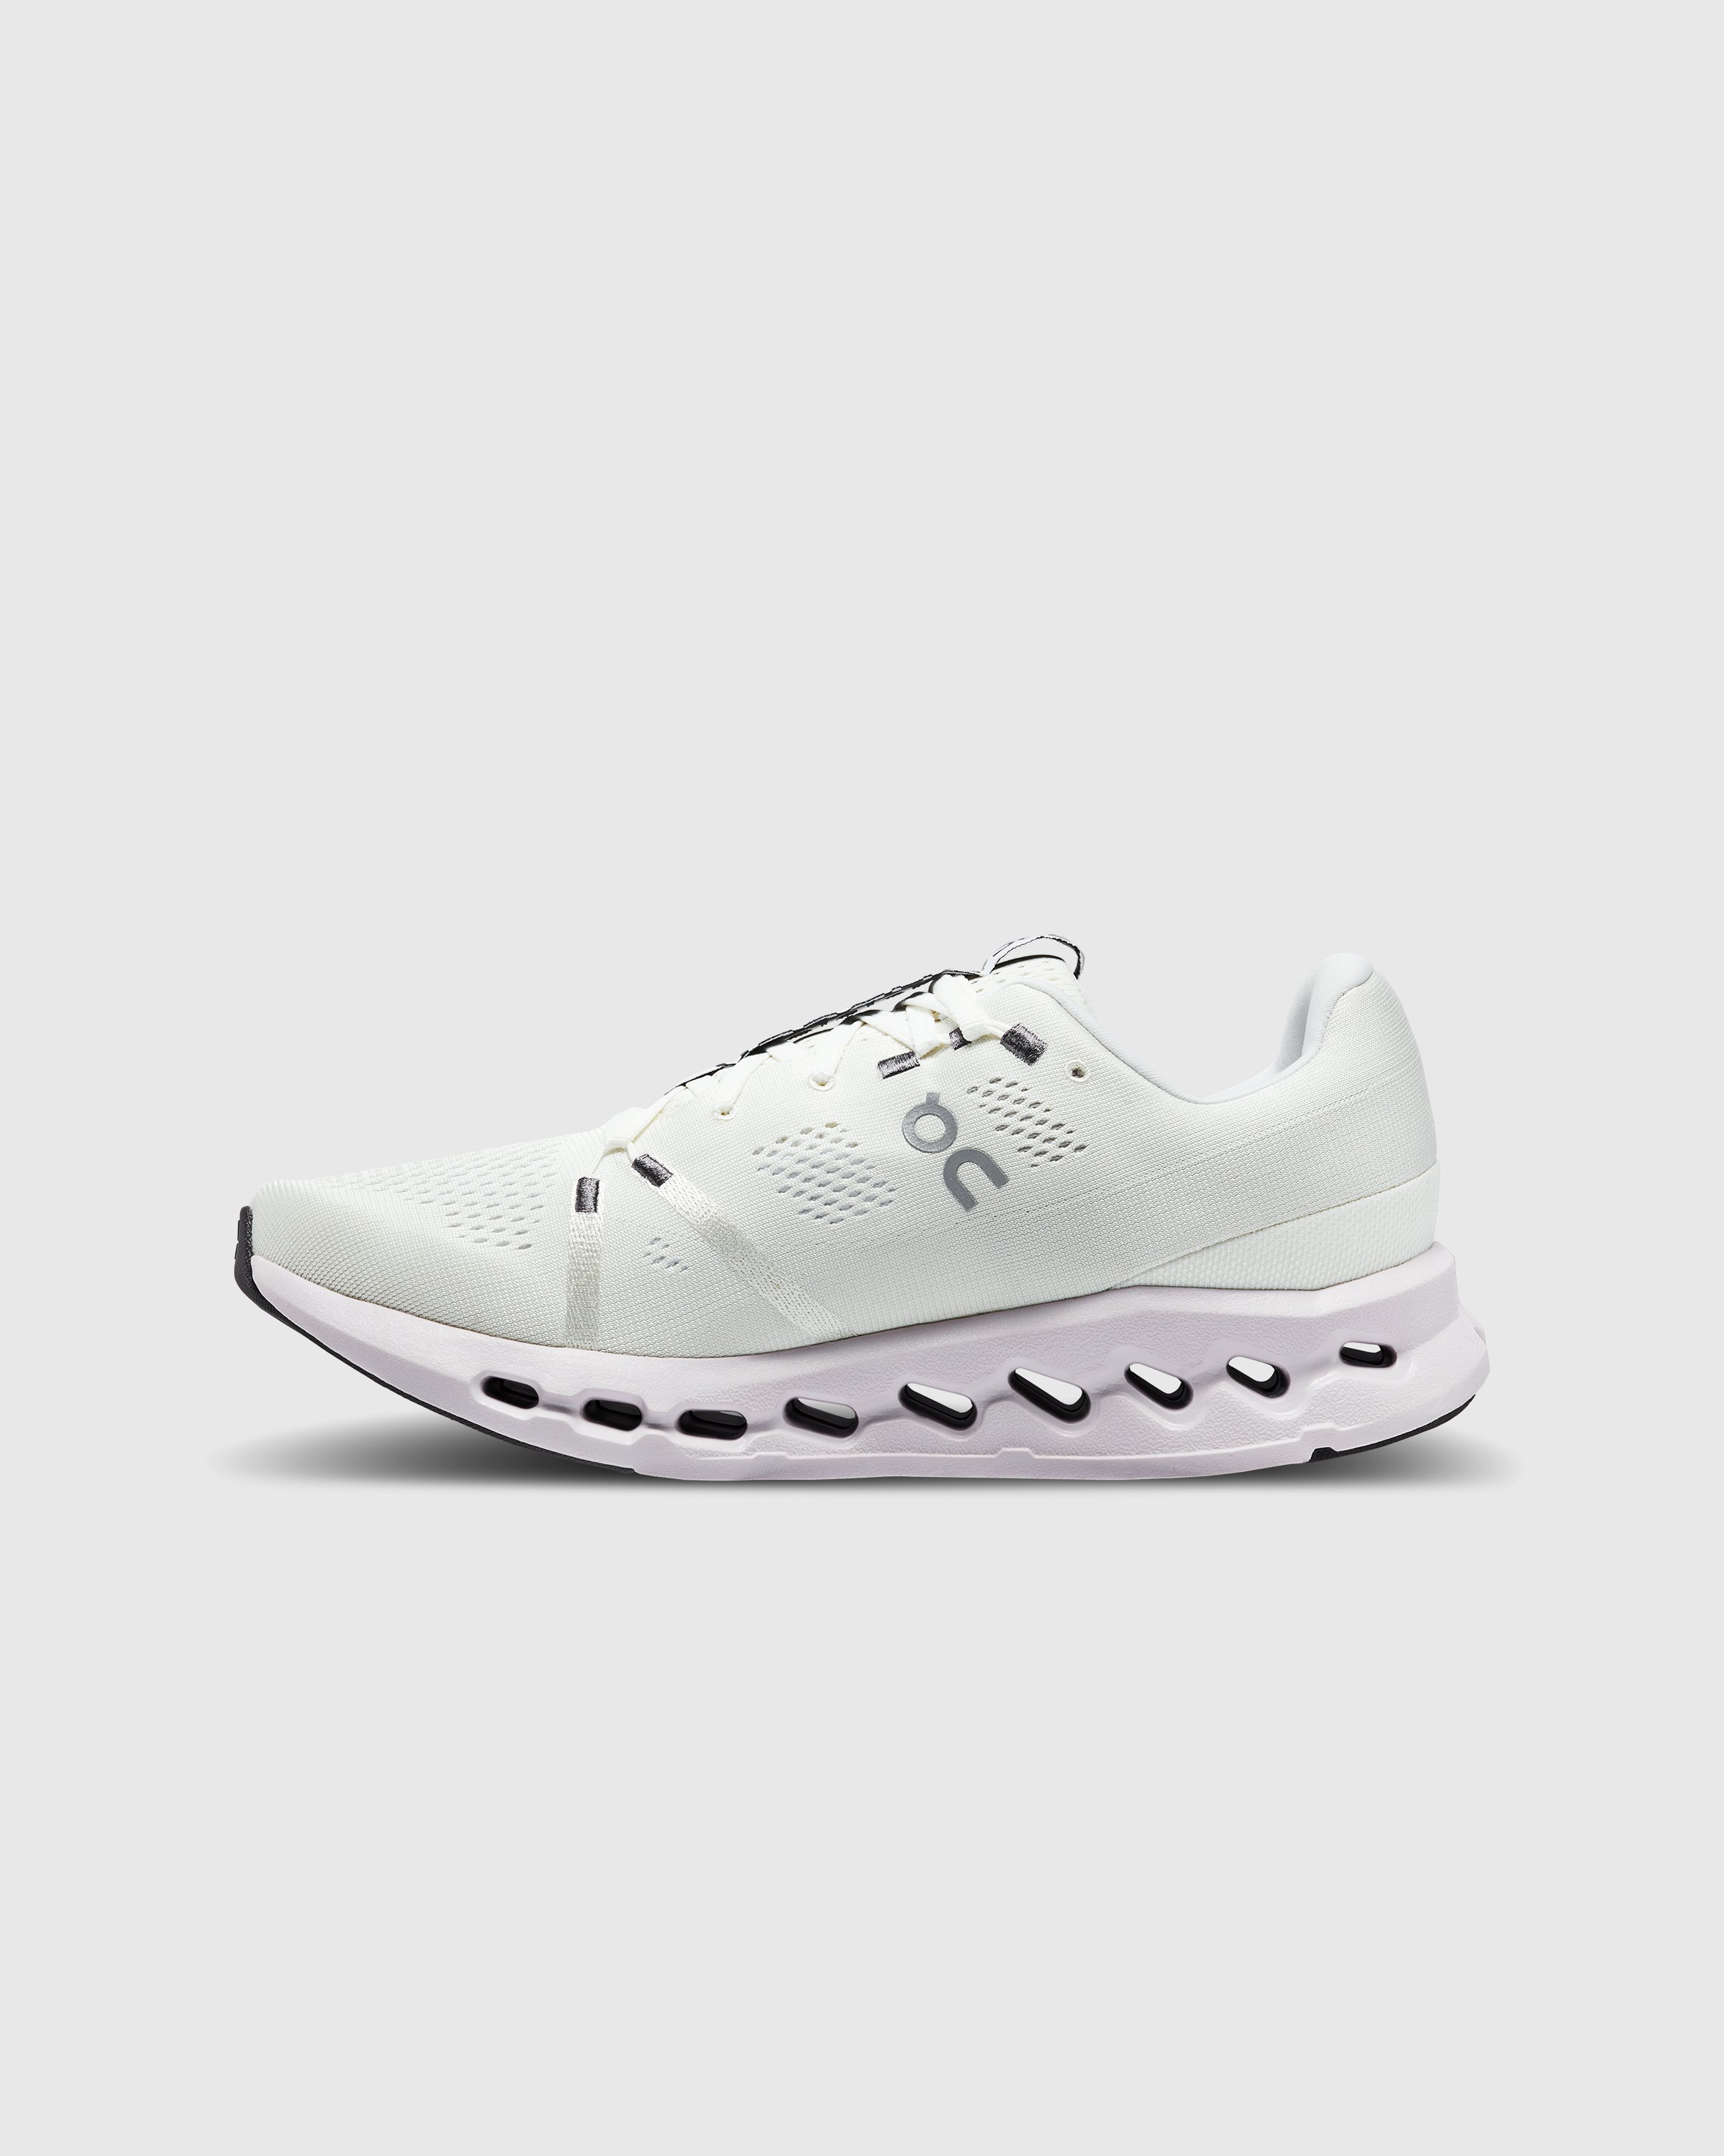 On - Cloudsurfer White/Frost - Footwear - White - Image 2